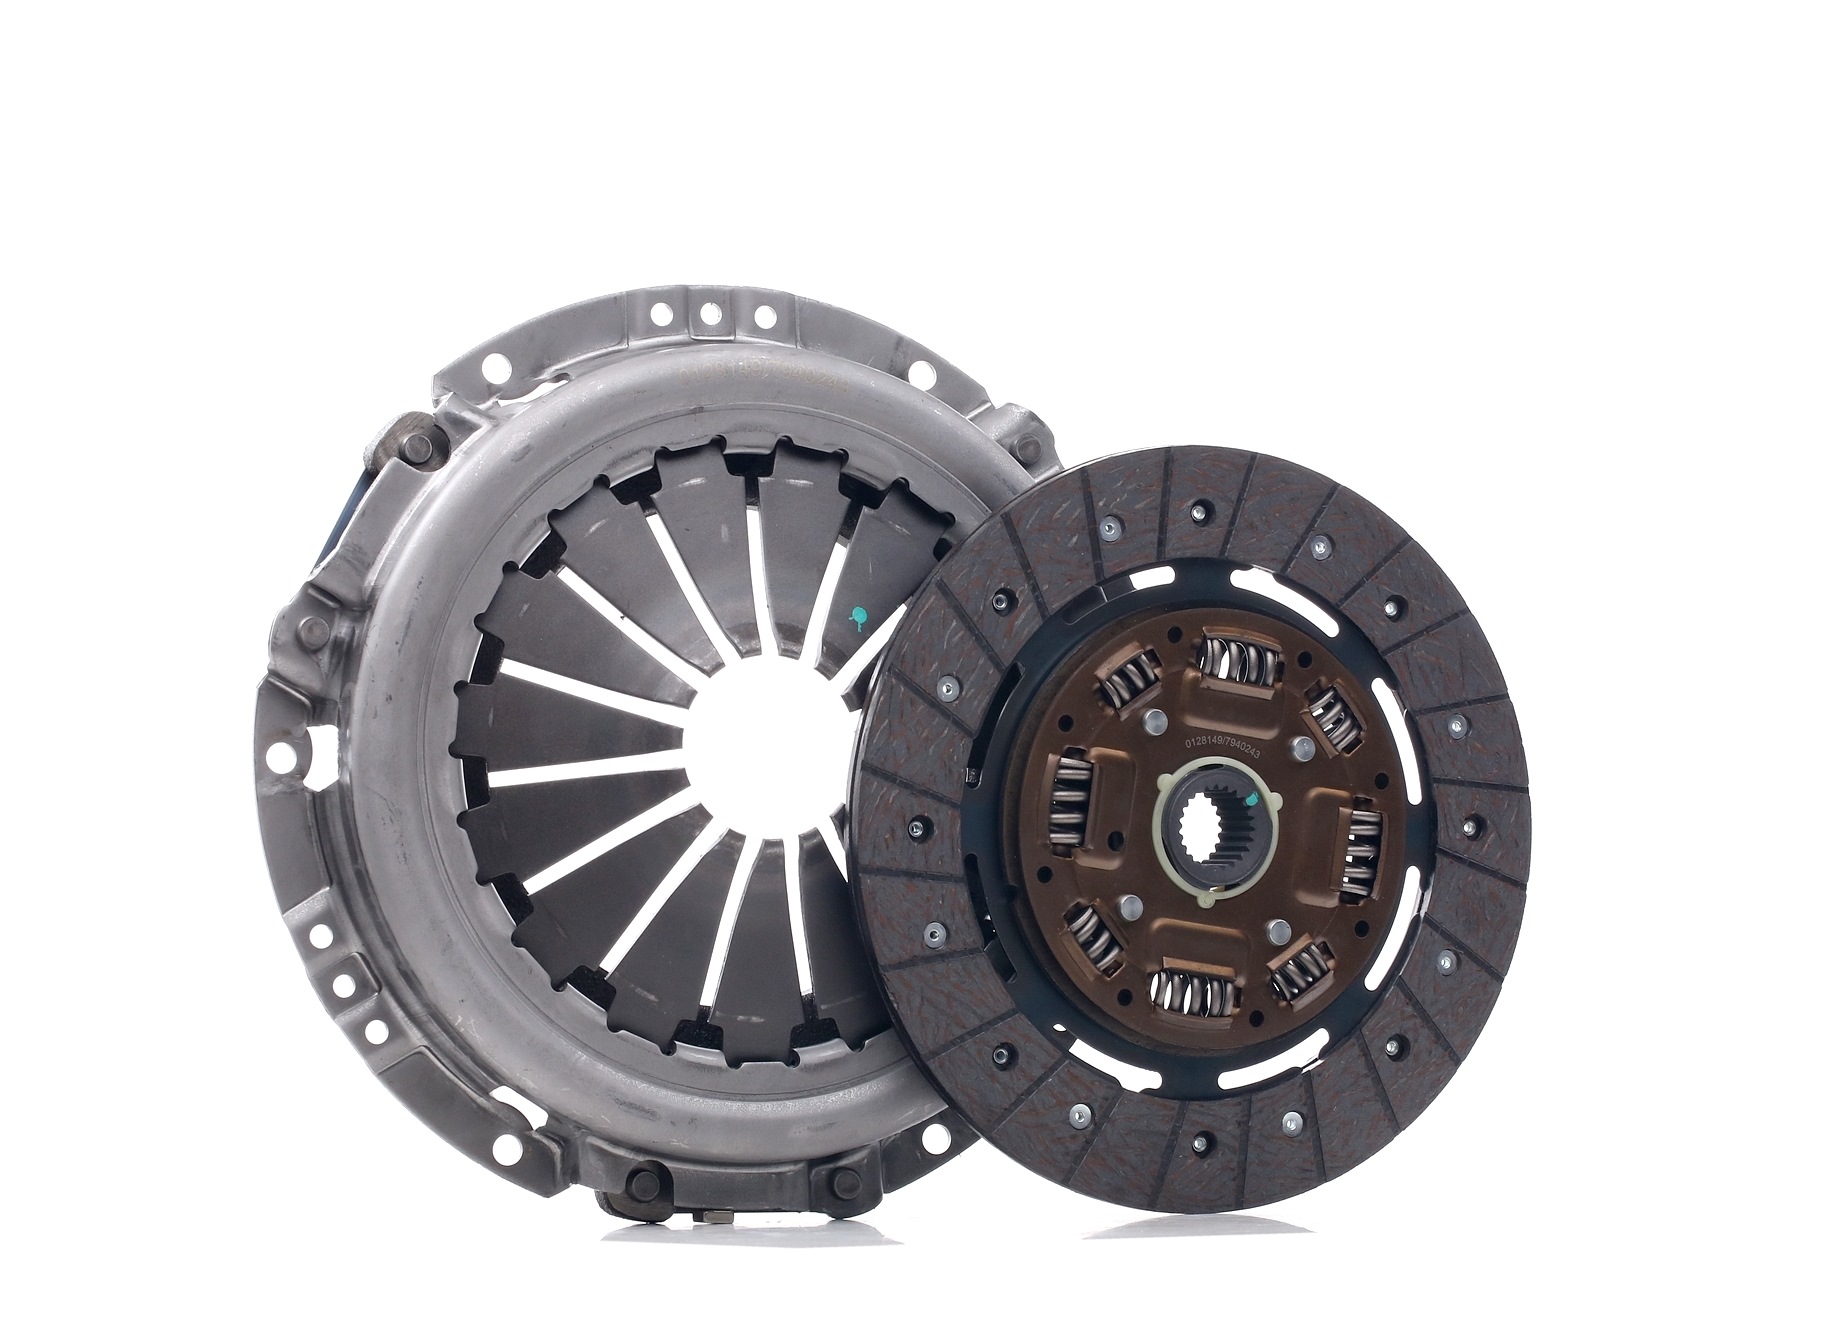 Original SKCK-0100081 STARK Clutch kit experience and price